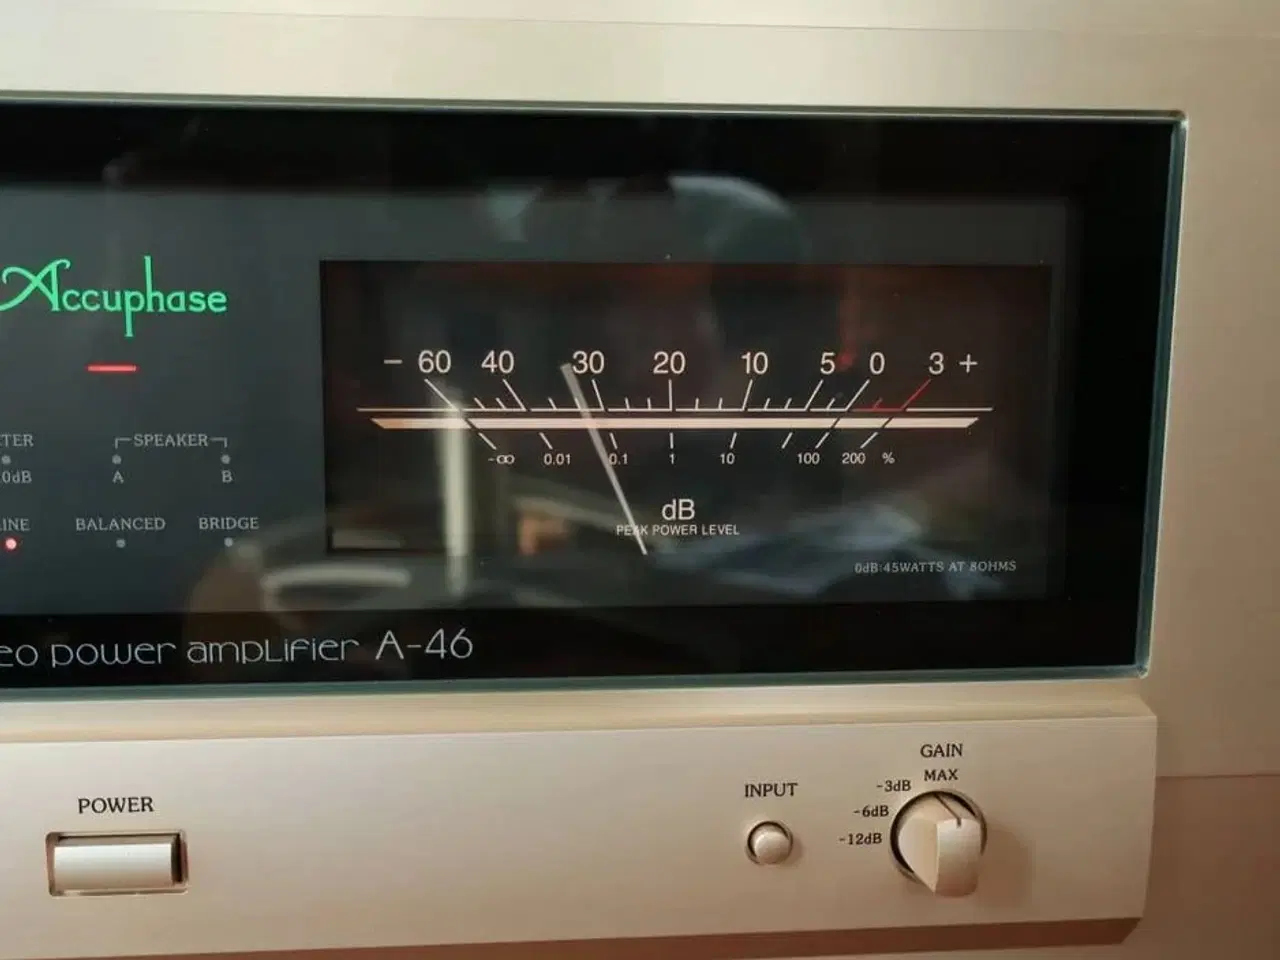 Billede 1 - Accuphase A-46 amplifier